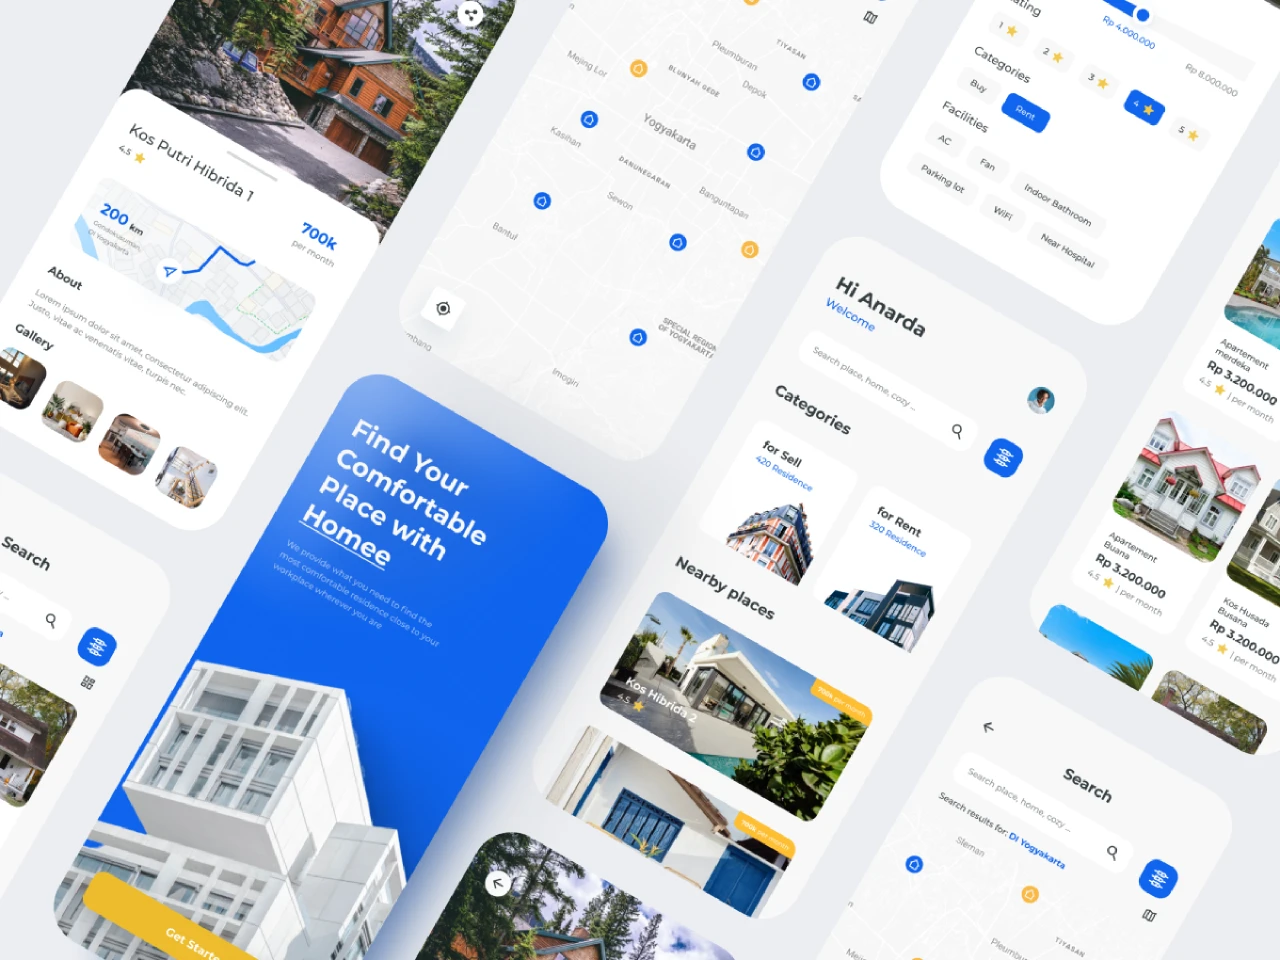 Homee - Convenient Housing Search (Buy or Rent House) Property Application for Figma and Adobe XD